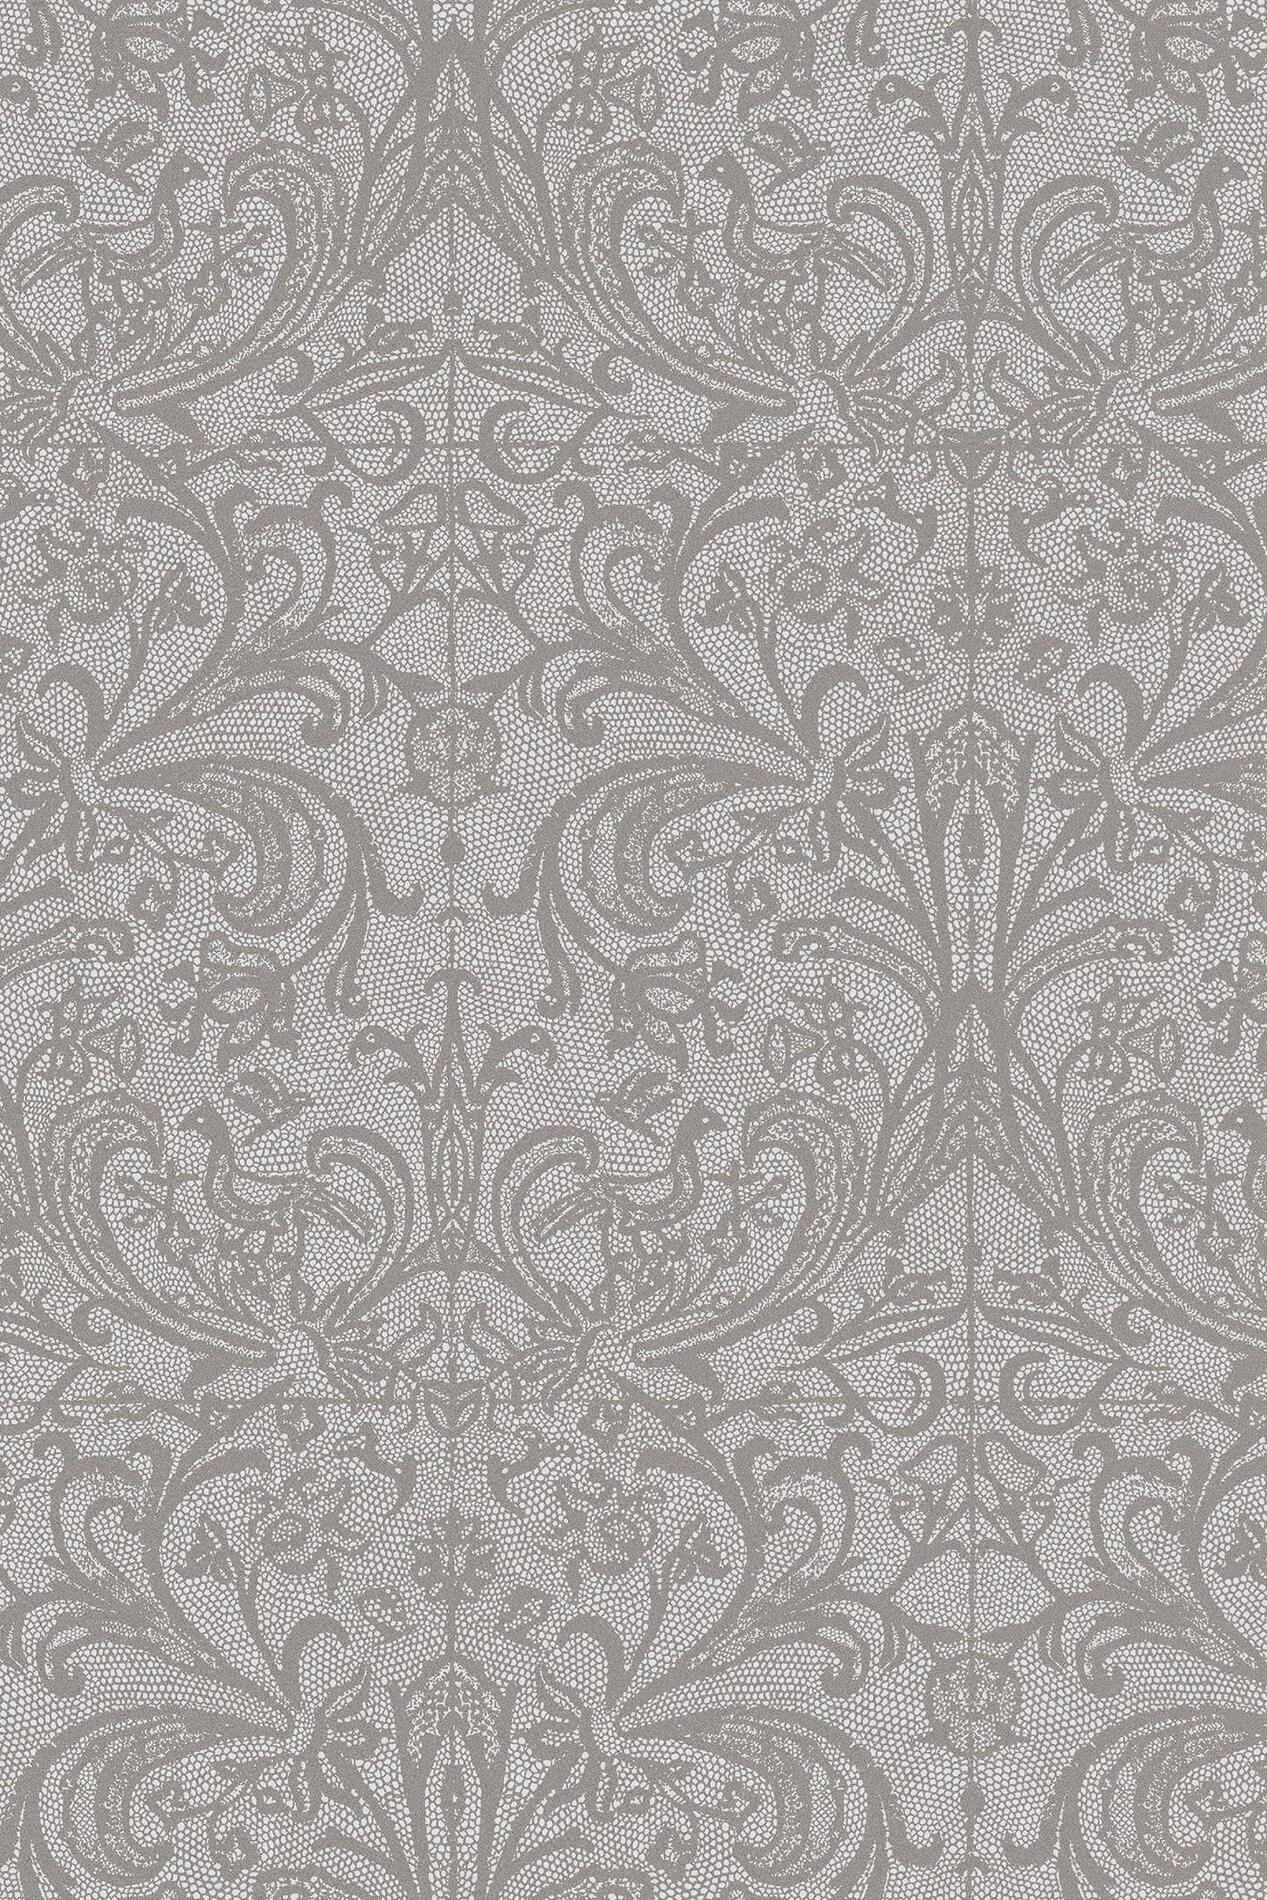 hooked-on-walls-classy-vibes-graceful-wallcovering-15514